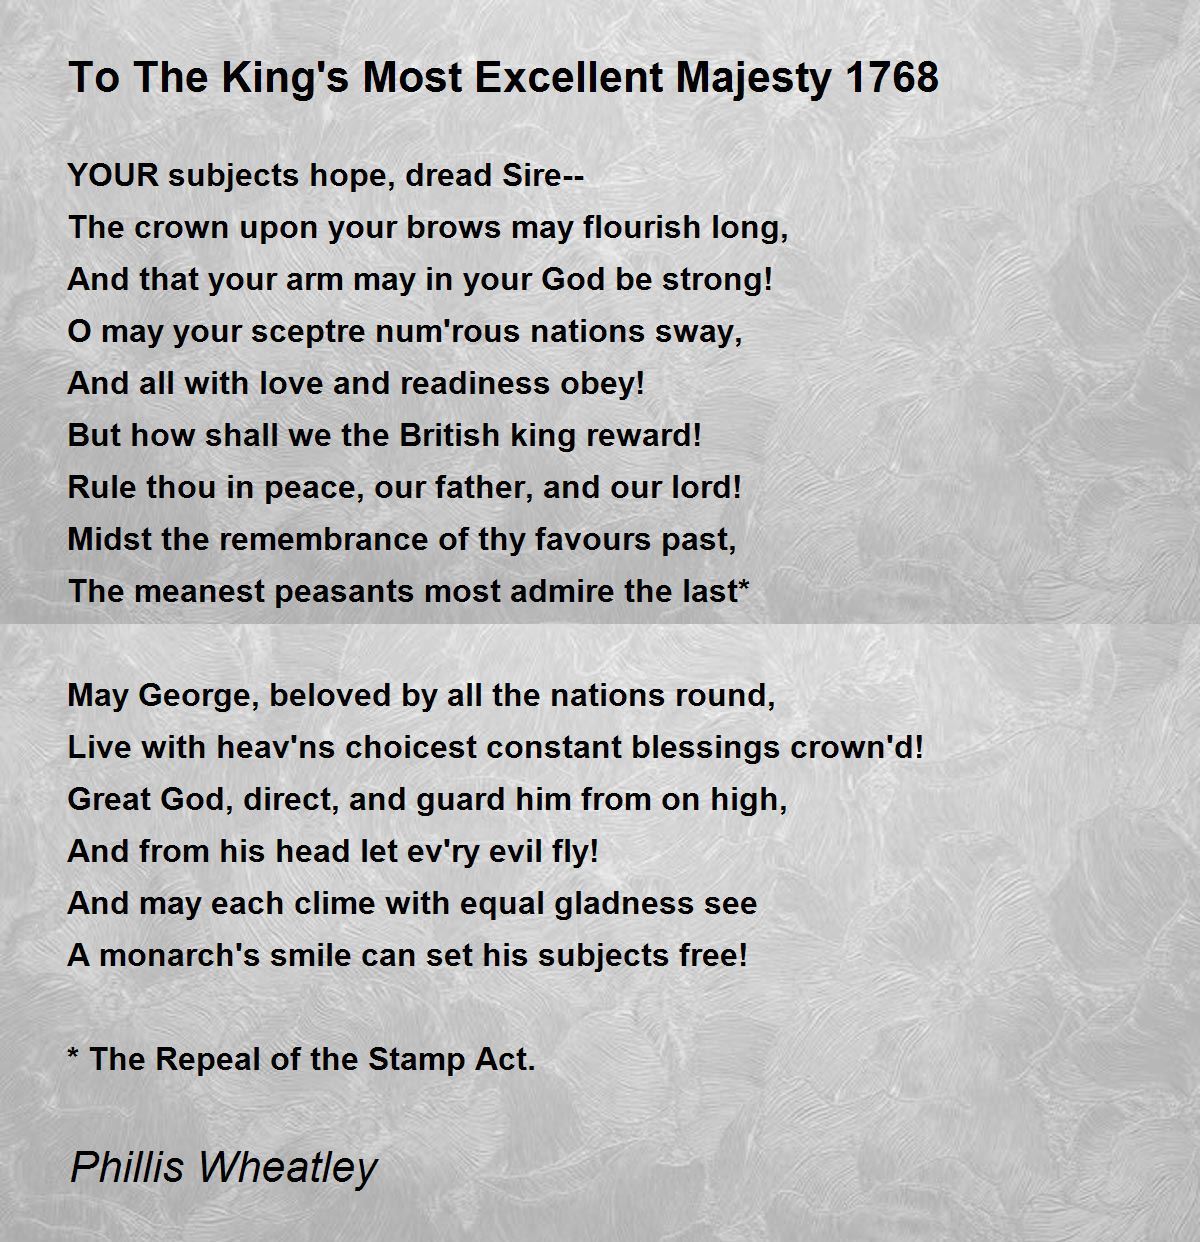 To The King's Most Excellent Majesty 1768 Poem by Phillis Wheatley